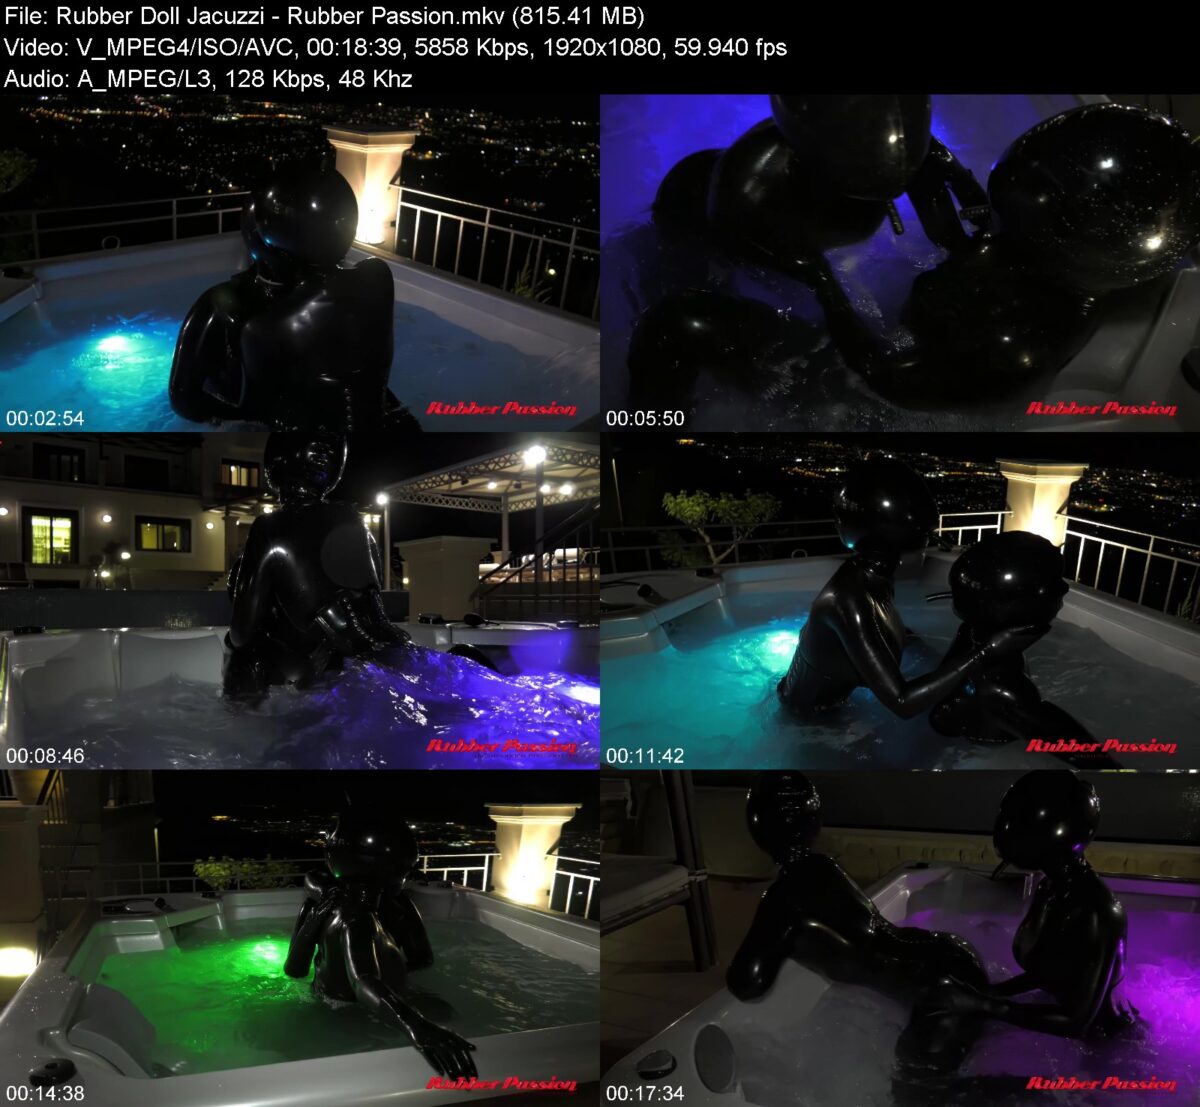 Rubber Doll Jacuzzi - Rubber Passion